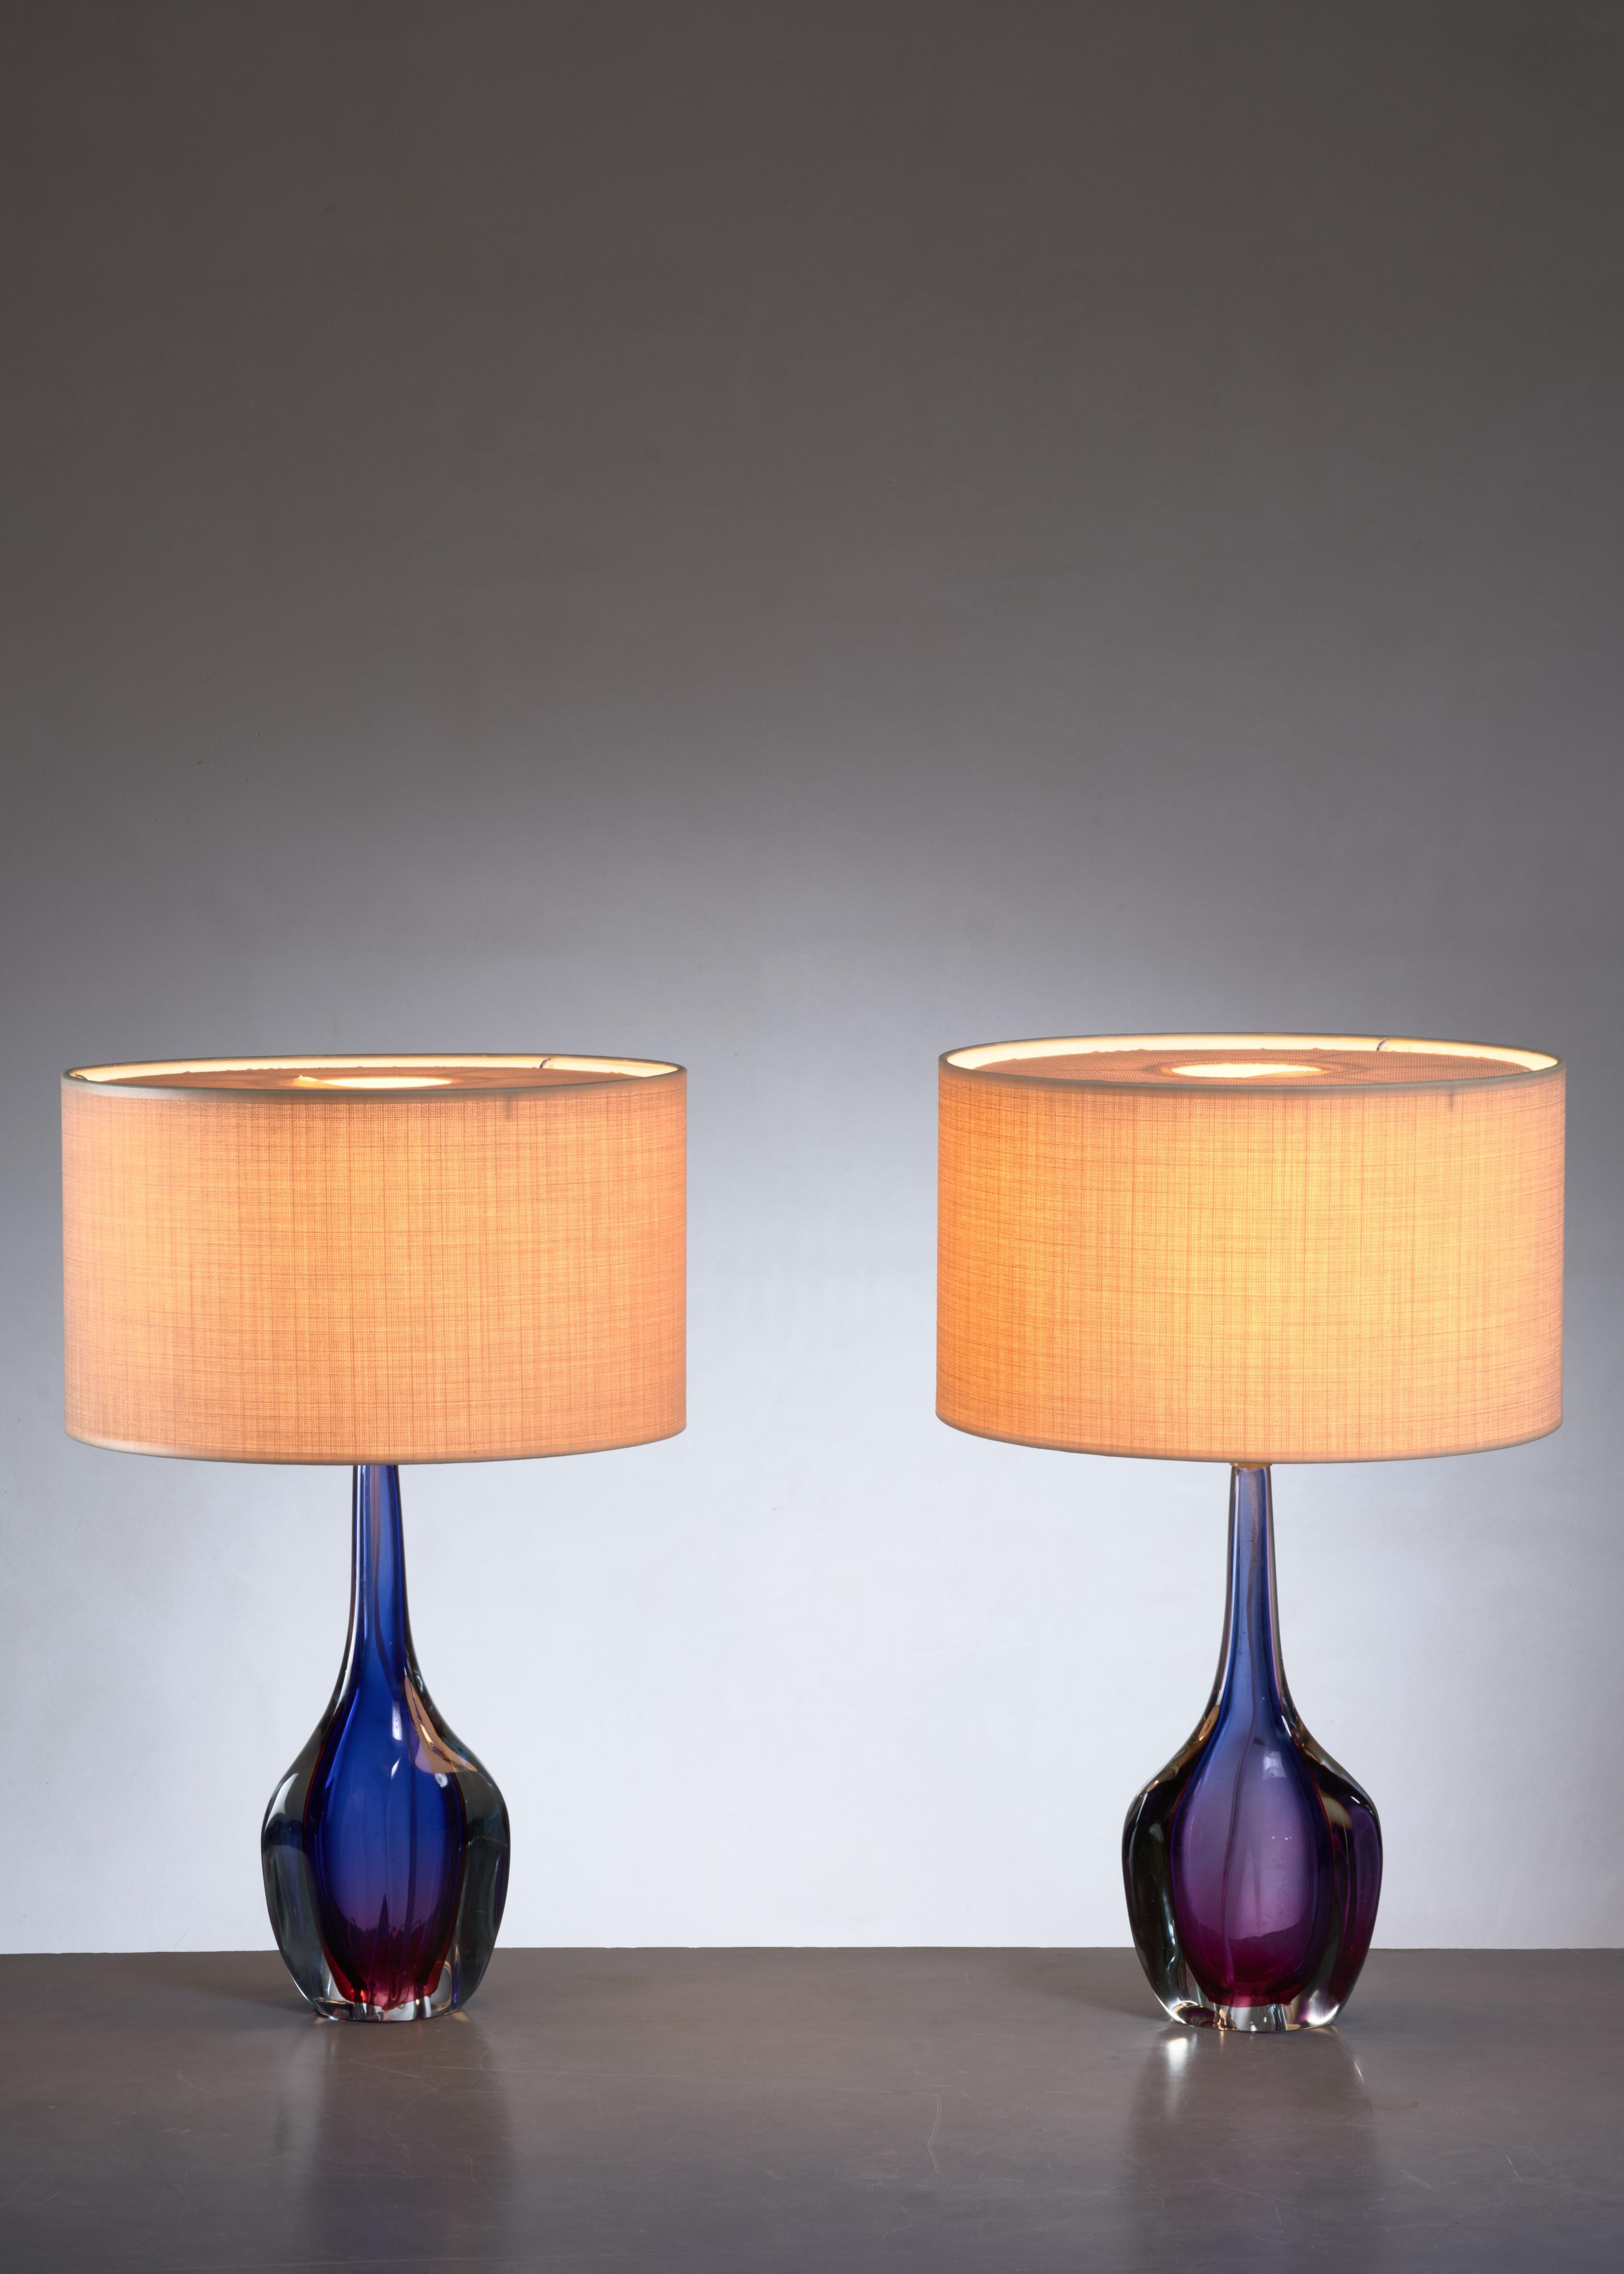 A pair of Murano glass table lamps with a blue and purple pattern in the glass, attributed to Flavio Poli. They are labeled by Arte Nuova, Murano with the text 'Grand Prize - Genuine Venetian Glass - World Fair Brussels 1958'

The measurements